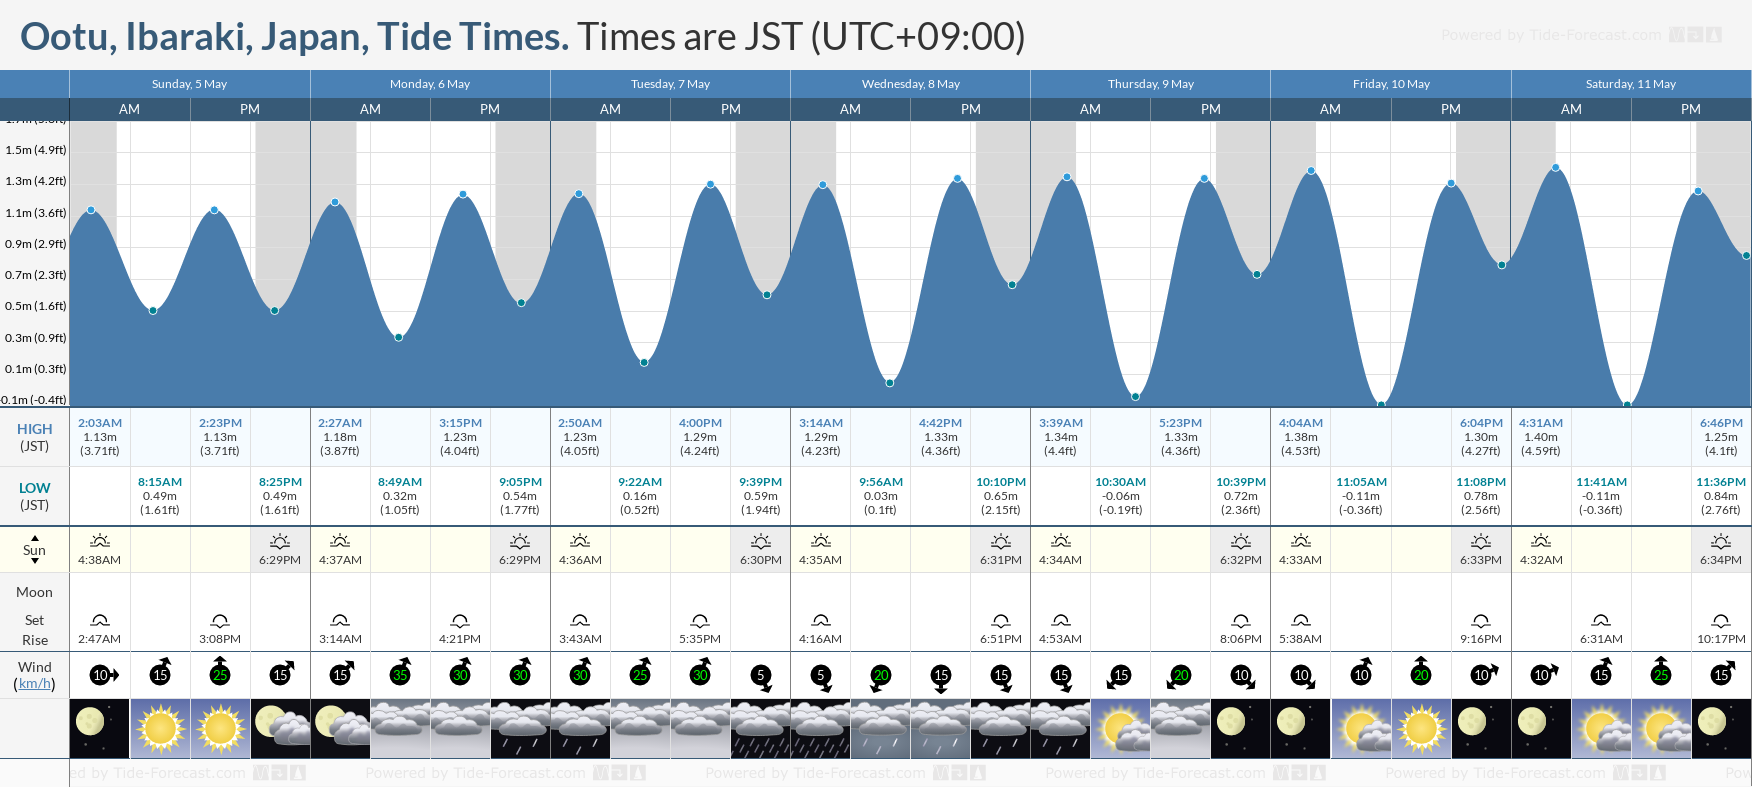 Ootu, Ibaraki, Japan Tide Chart including high and low tide tide times for the next 7 days